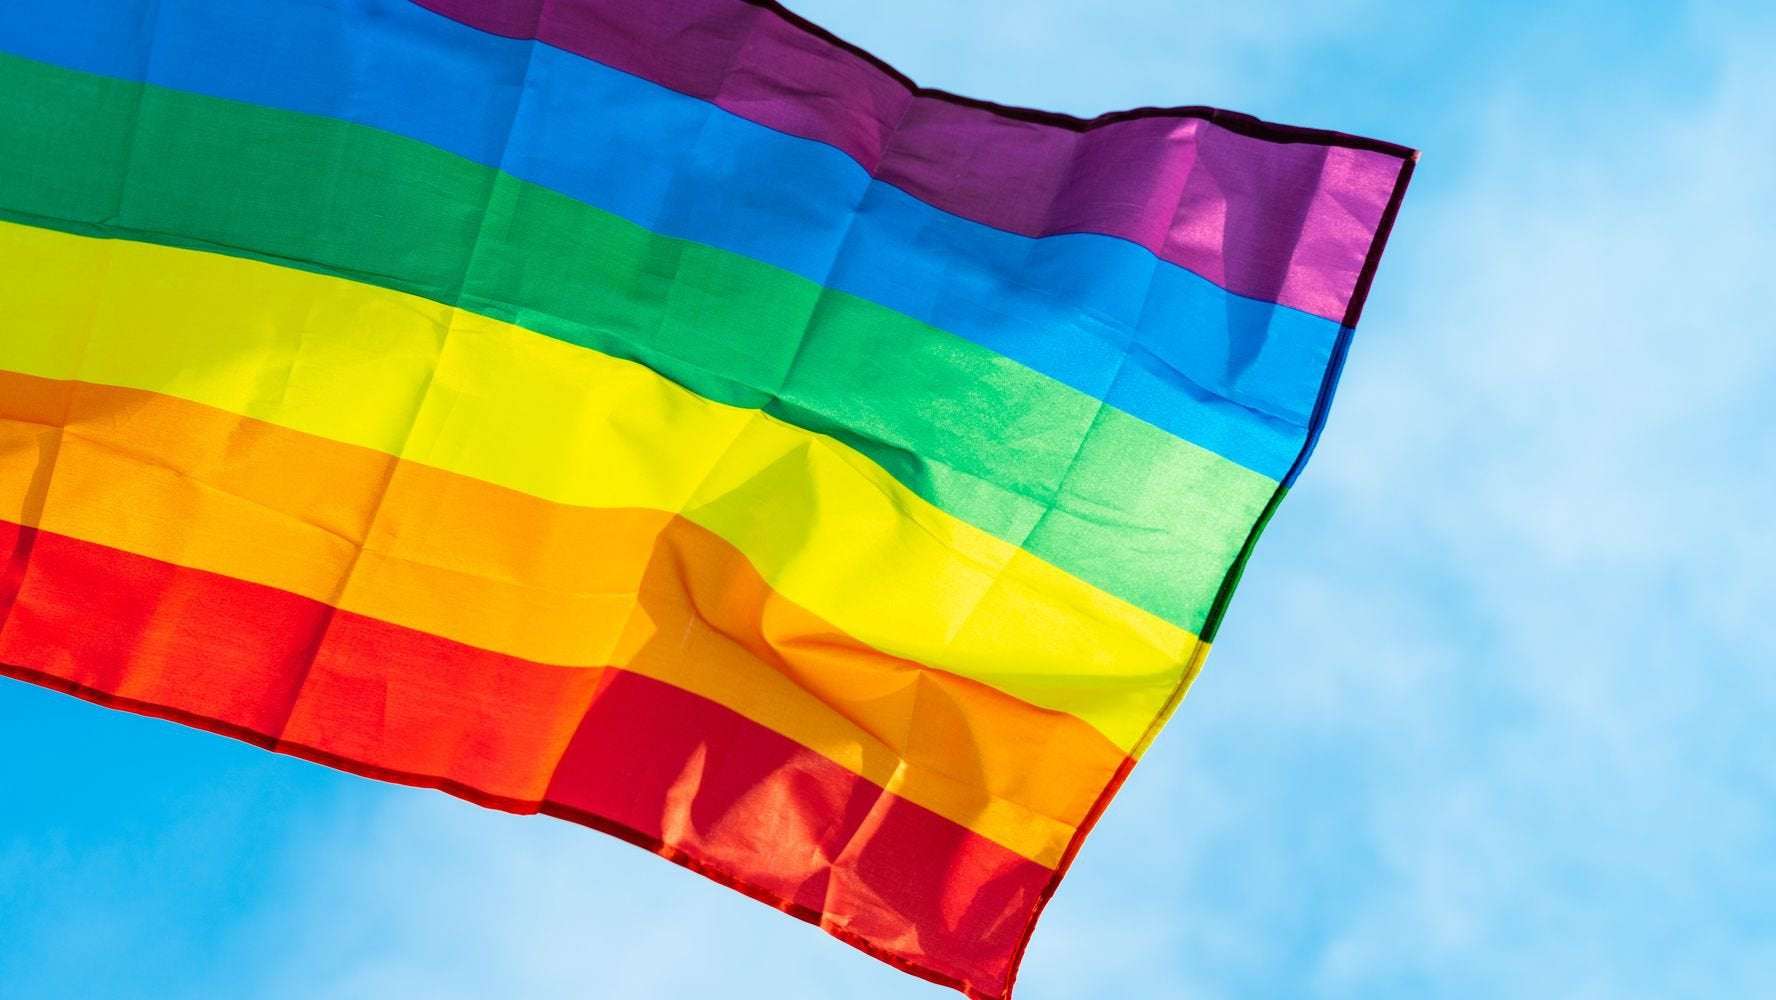 image for Florida High School Student Suspended After Handing Out Pride Flags